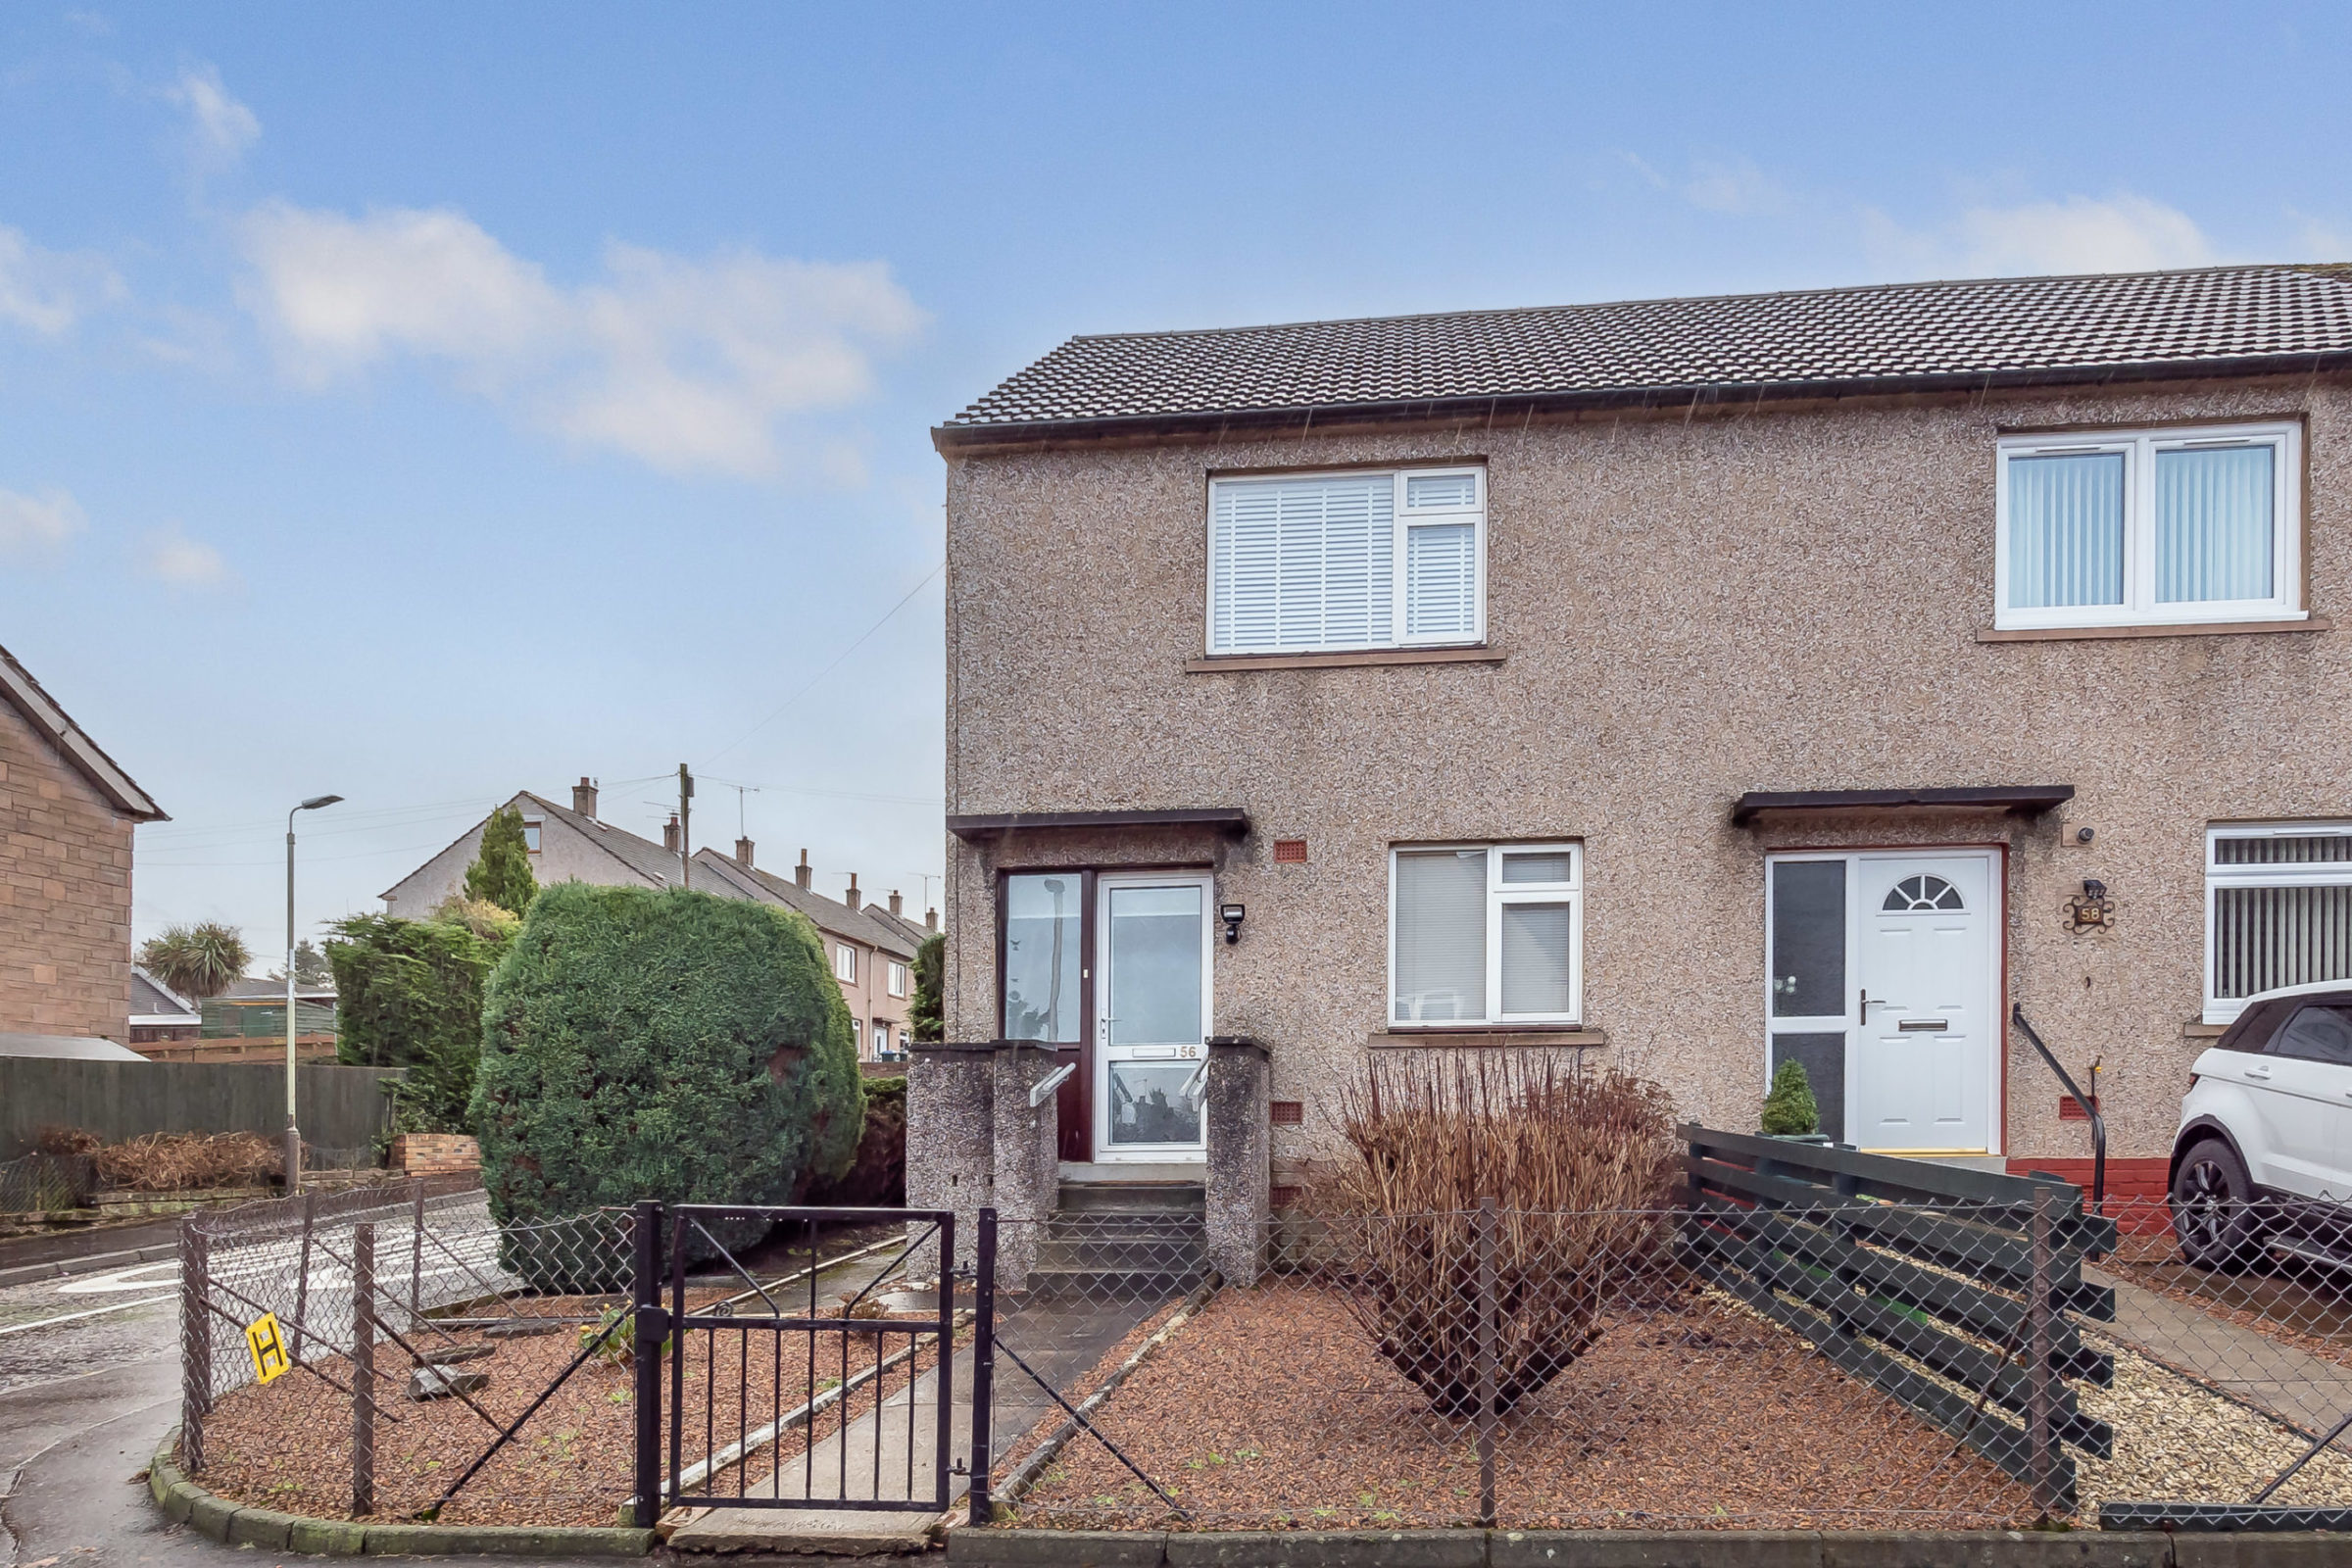 2 Bed End Terraced Villa – 56 Fortingall Place, Perth PH1 2NG